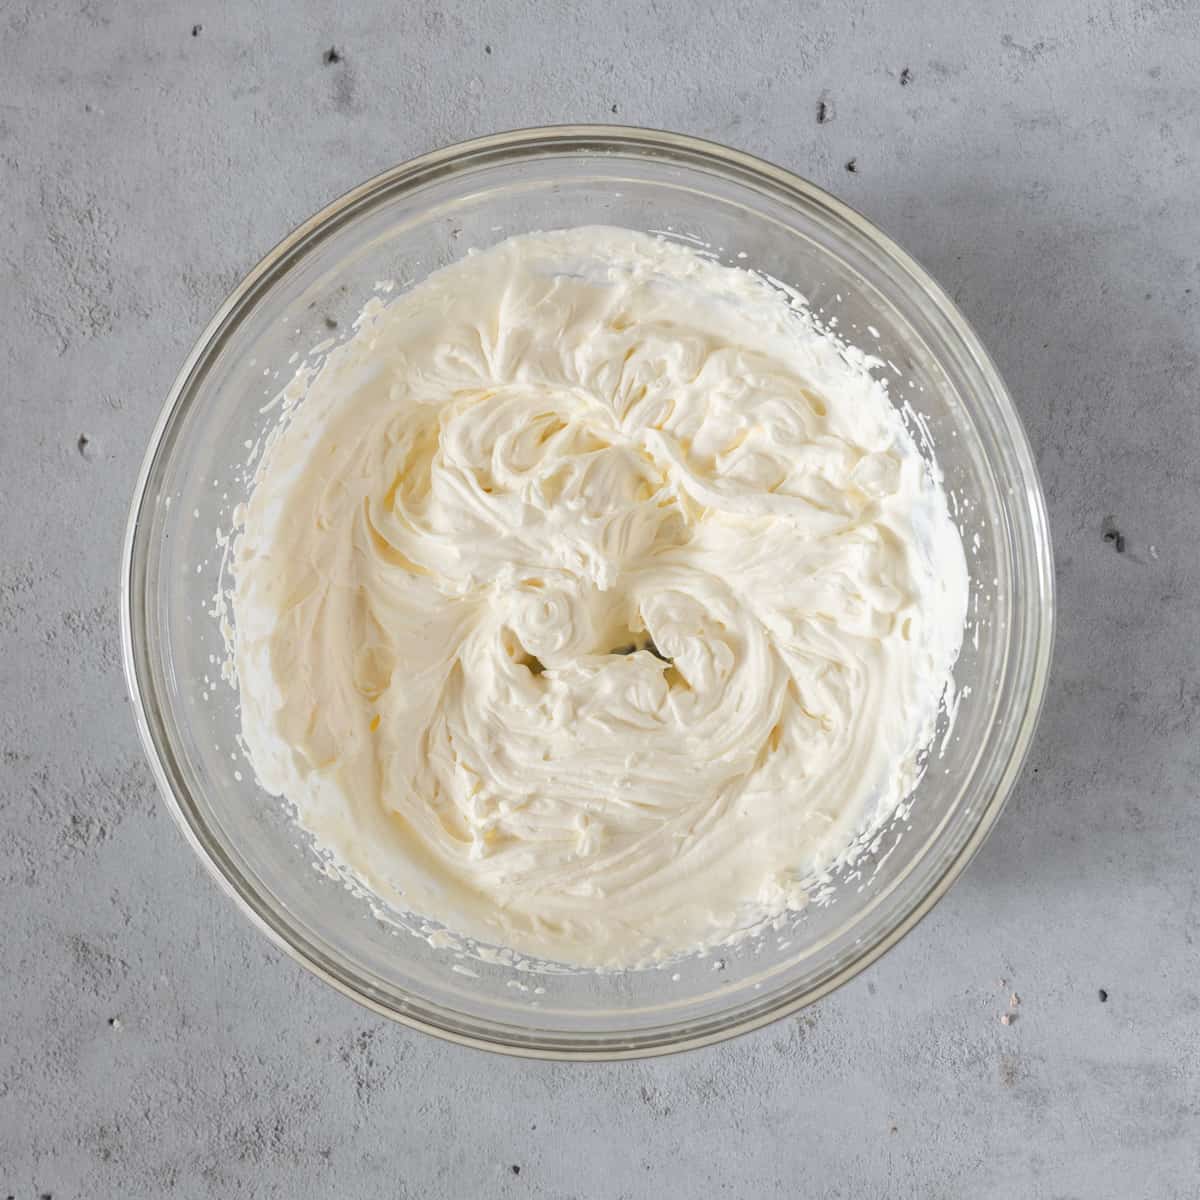 the whipped cream in a glass bowl on a grey background.